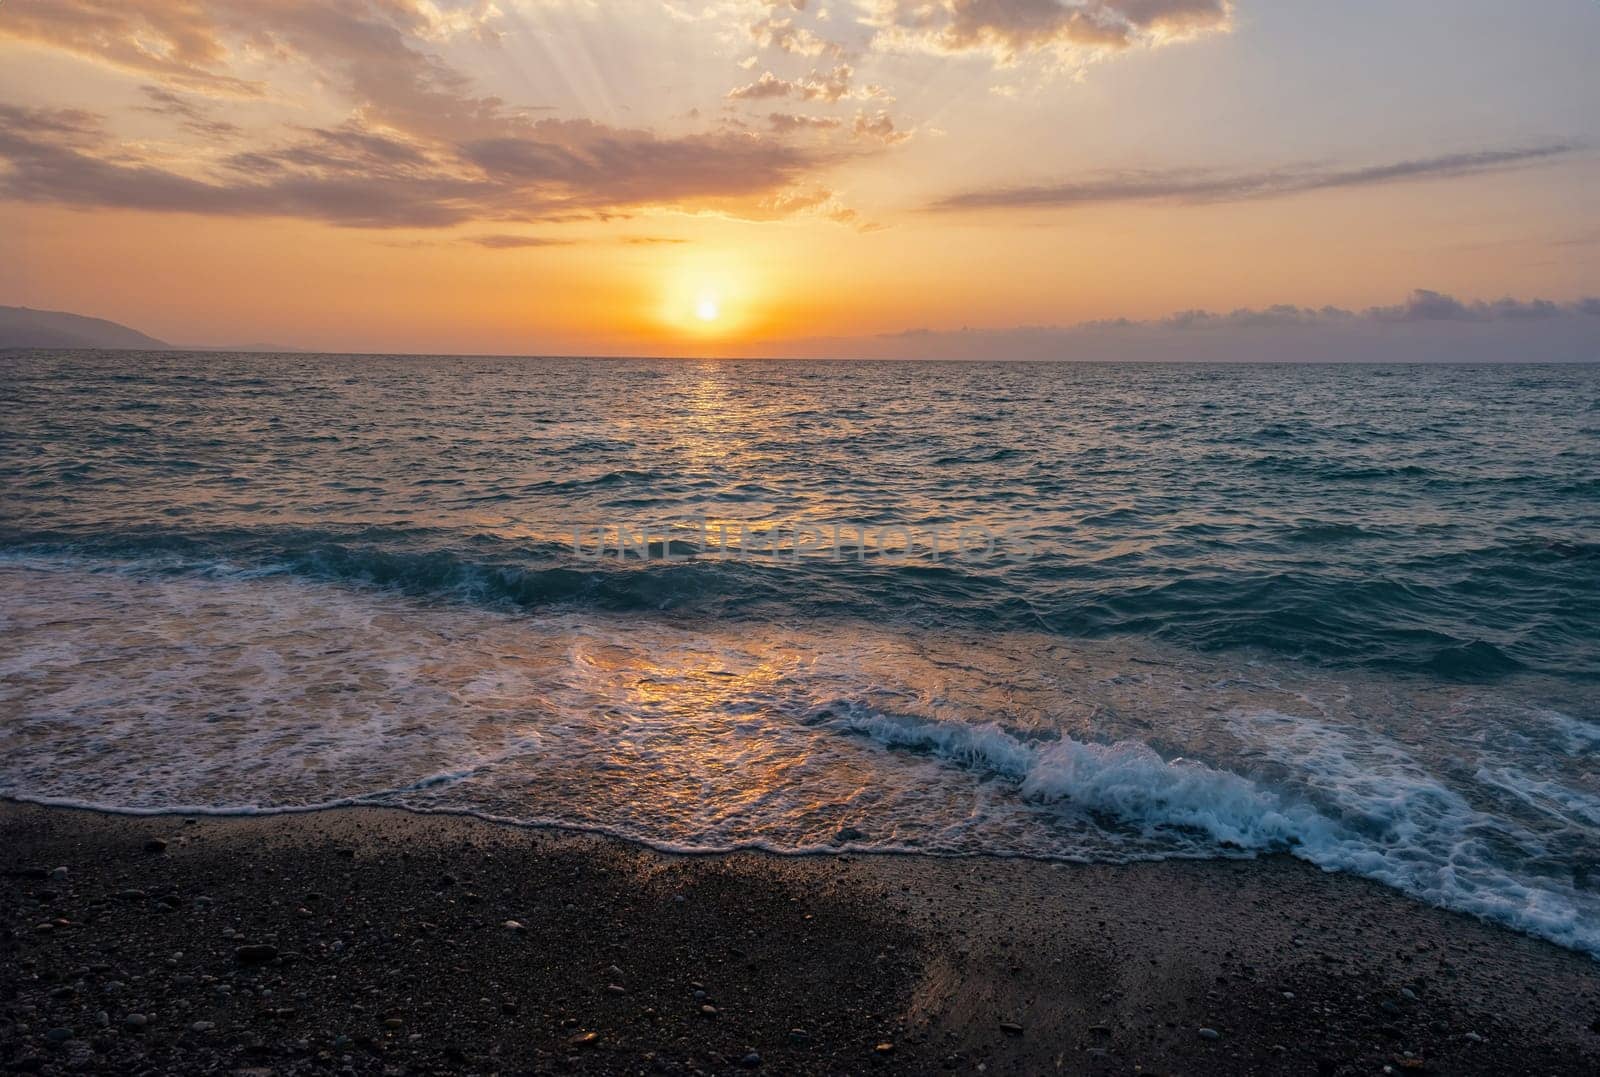 The picturesque sea at sunset. Sunset on the Black Sea with the sun, Abkhazia. Colorful sunset with waves.